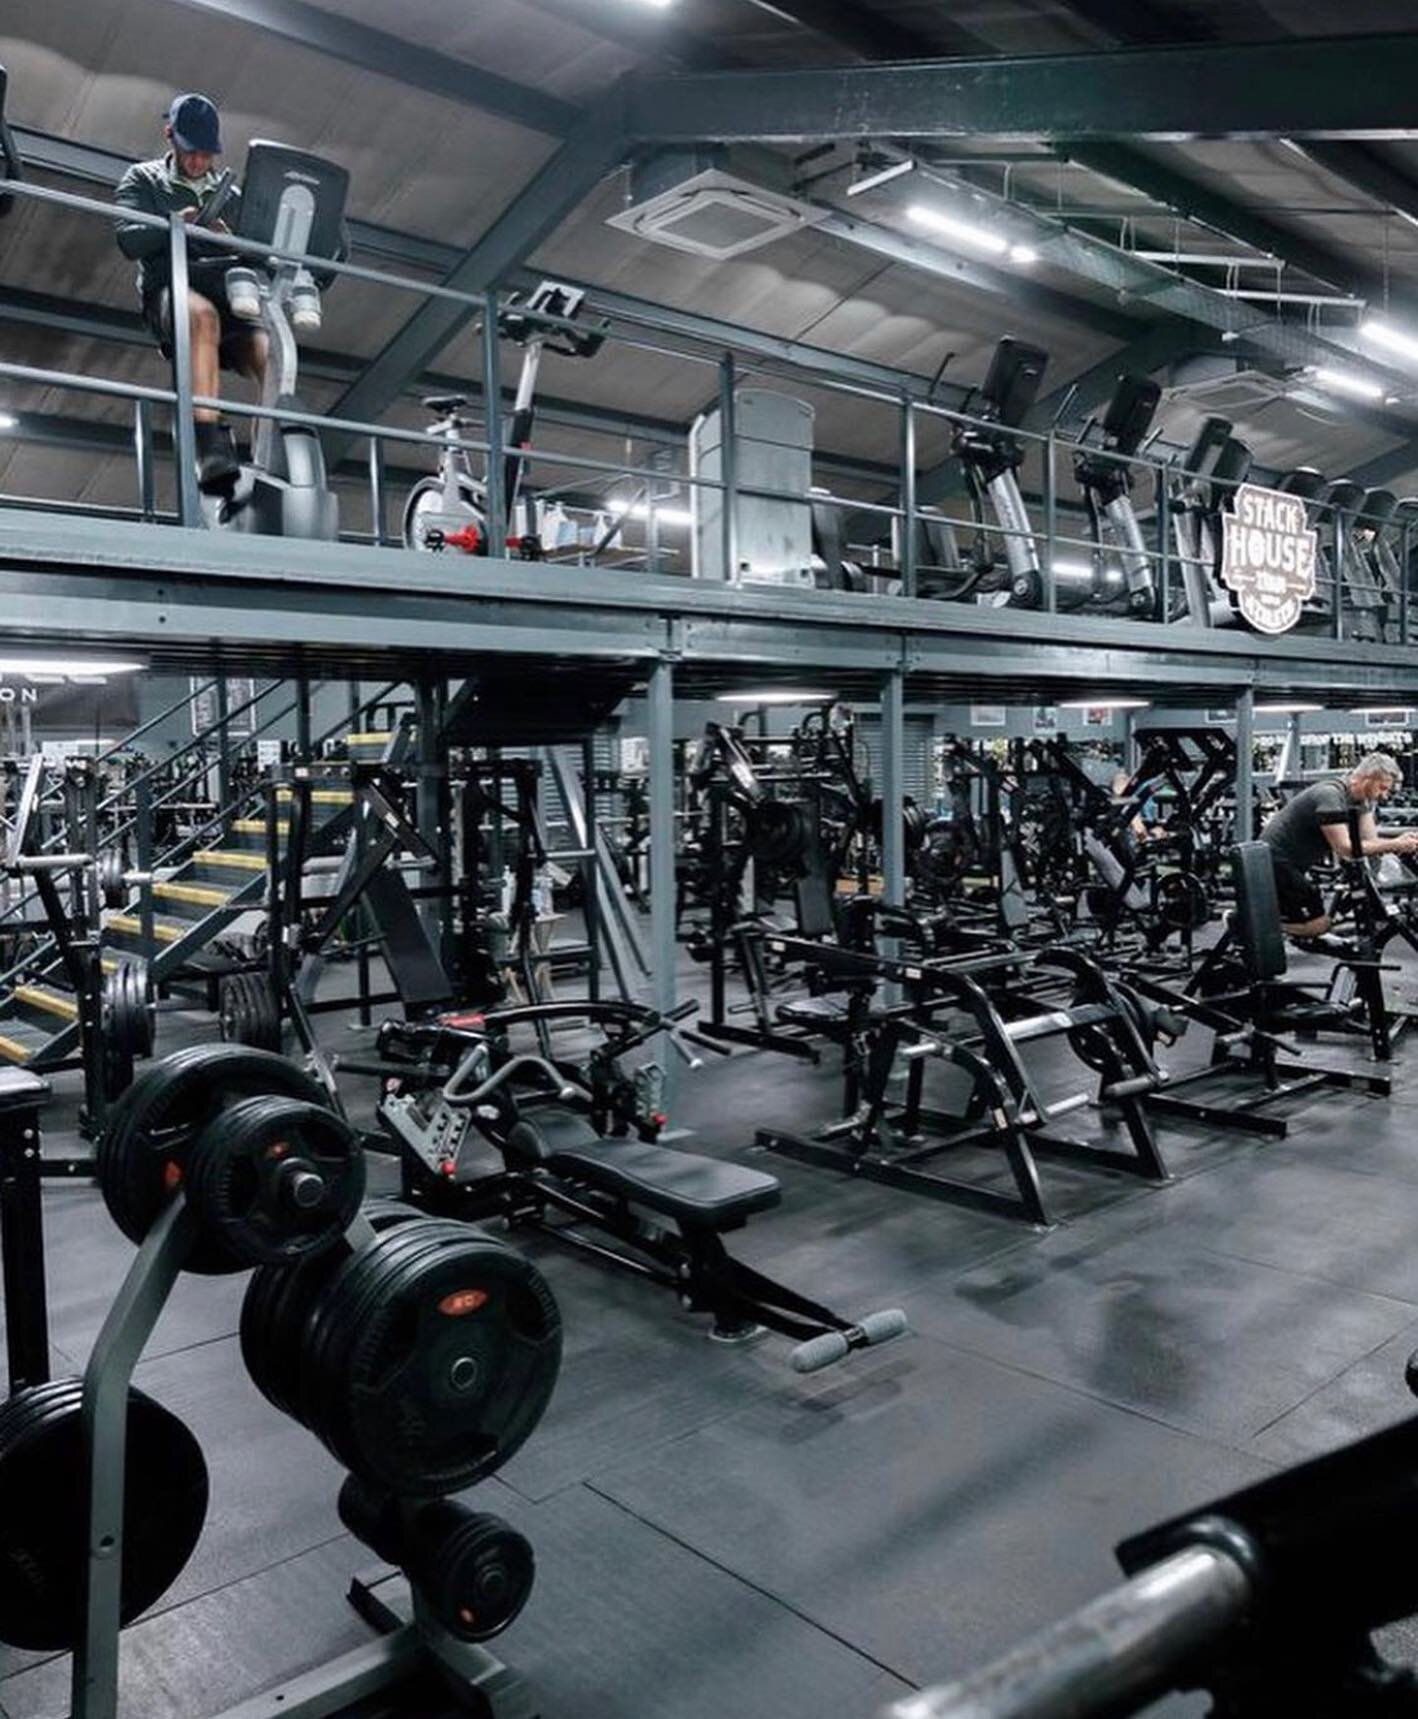 Did you know we offer a detailed induction to new and existing members? This is a great way to learn how to use the equipment. Speak to us at reception for more info. @stackhousegym_rayleigh